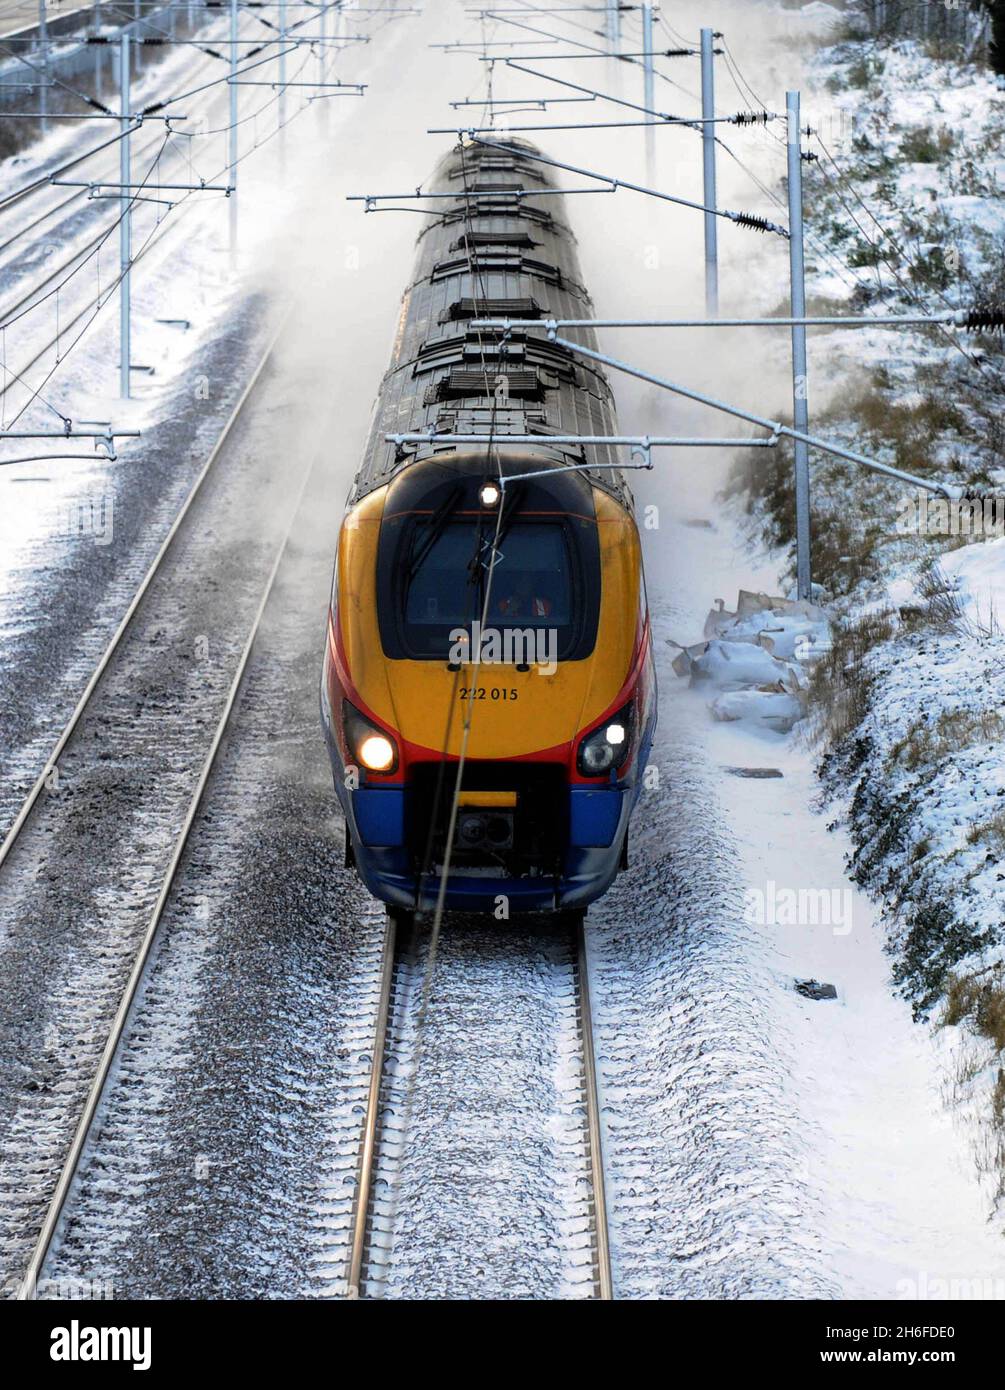 A commuter train in the snow in North London this morning Stock Photo